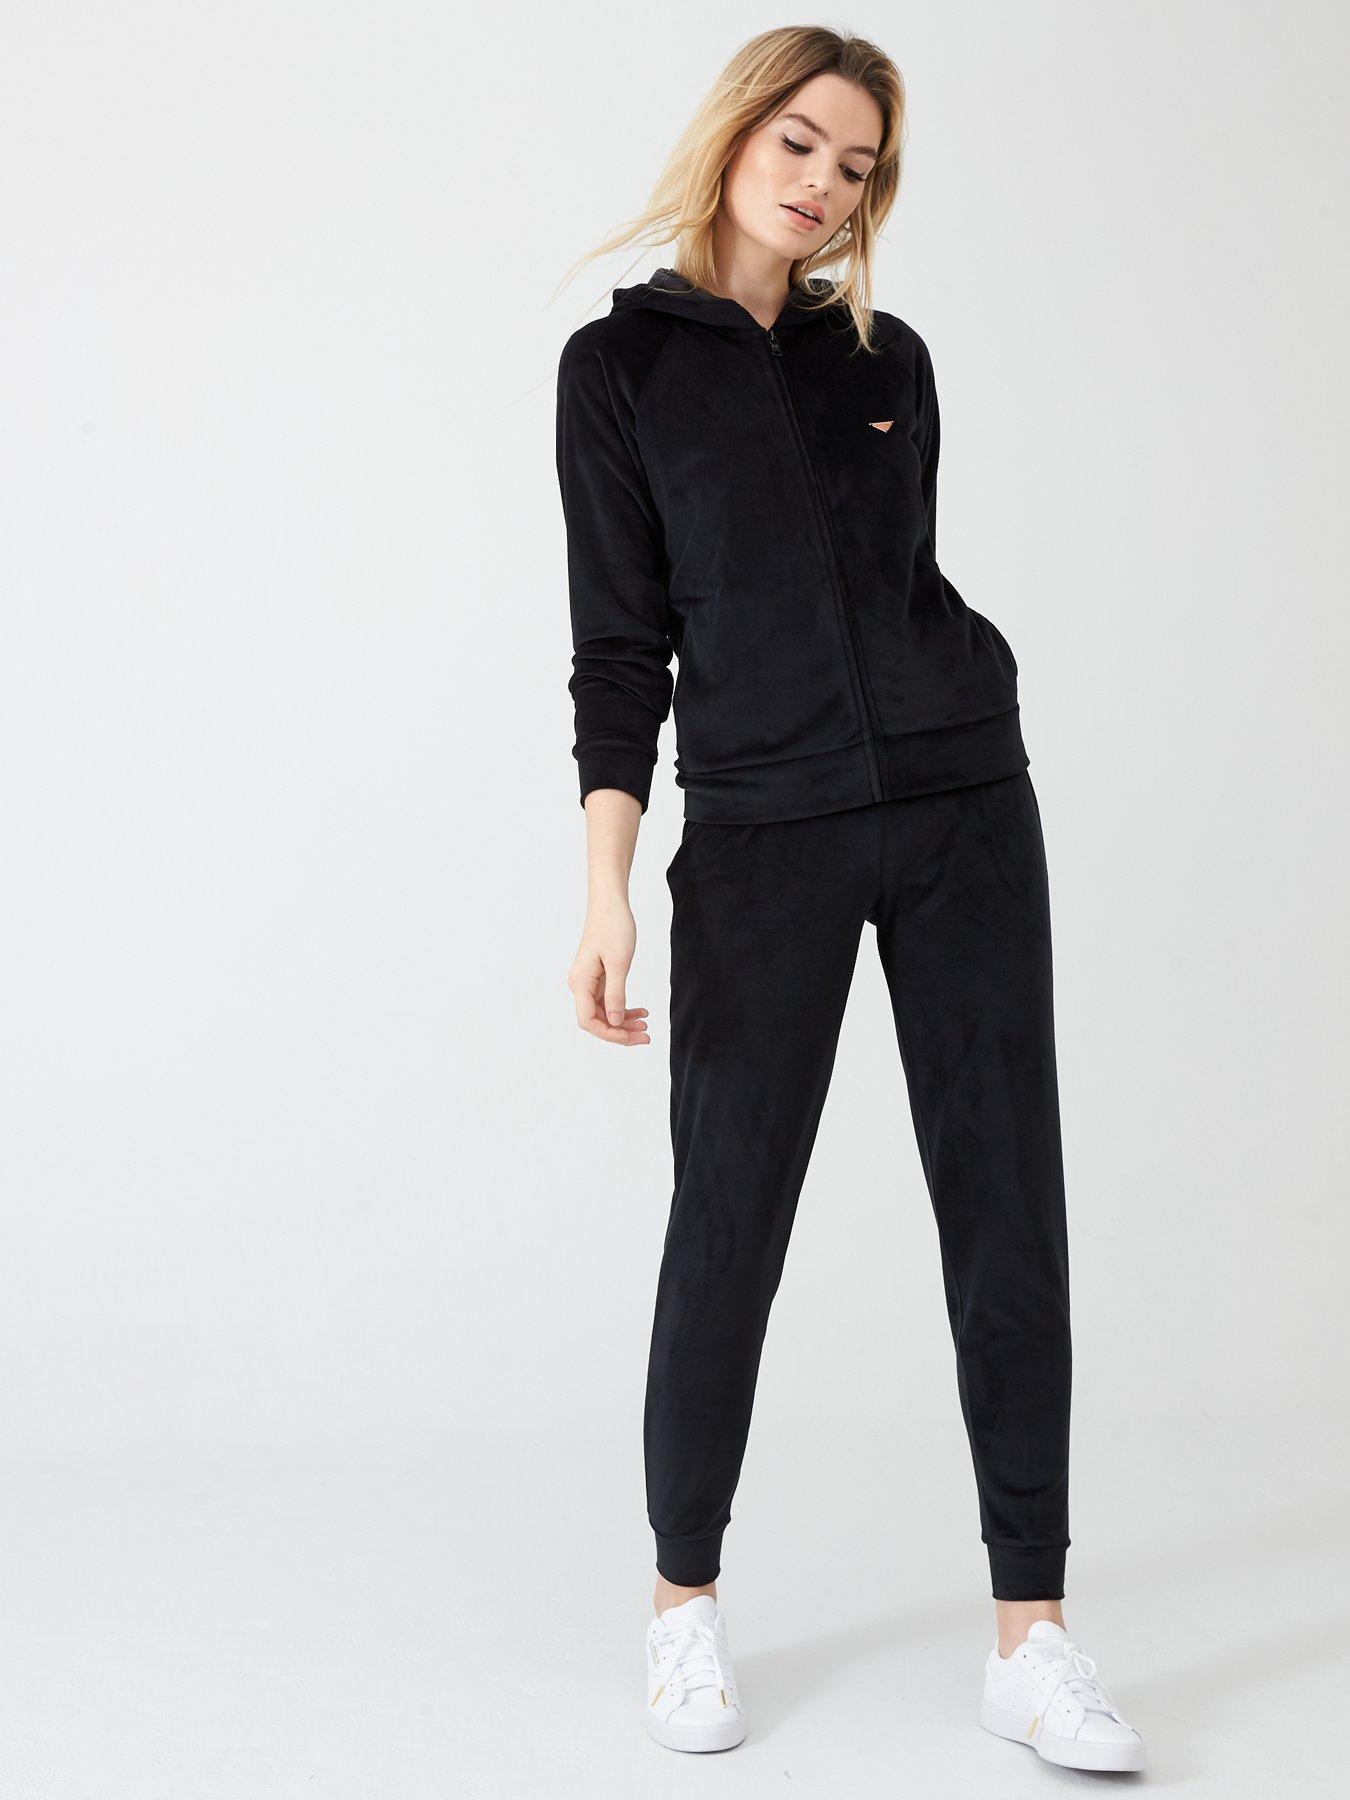 suede tracksuit womens